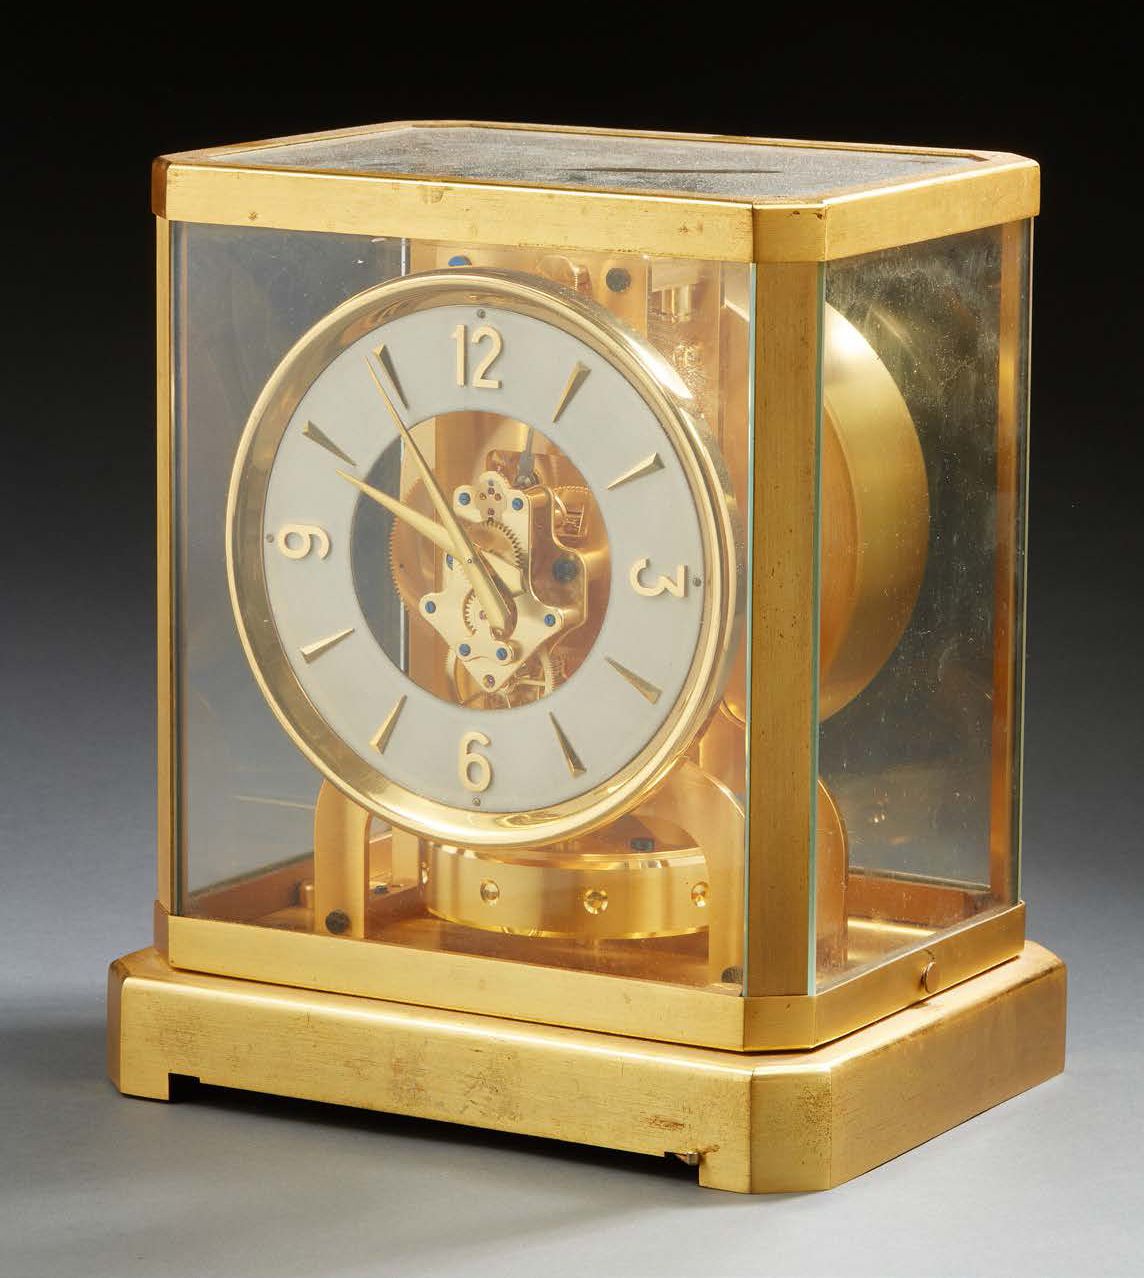 JAEGER-LECOULTRE ATMOS Atmospheric perpetual movement clock with a cubic-shaped &hellip;